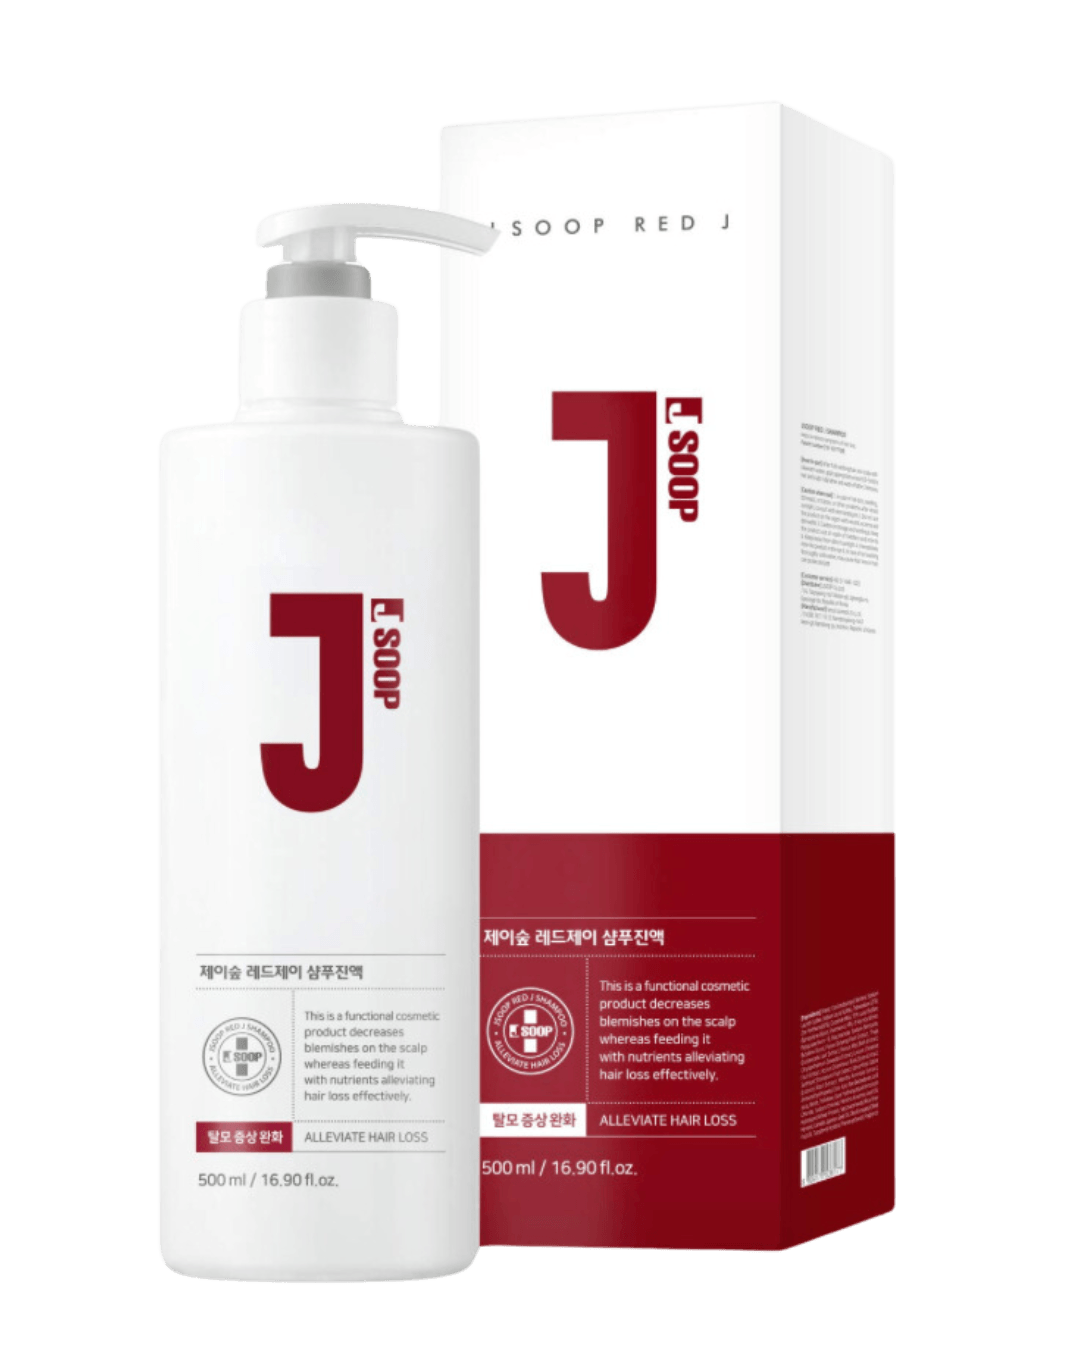 Daily Vanity Beauty Awards 2024 Best  Jsoop Red J Hair Loss Healing Fixer Voted By Beauty Experts